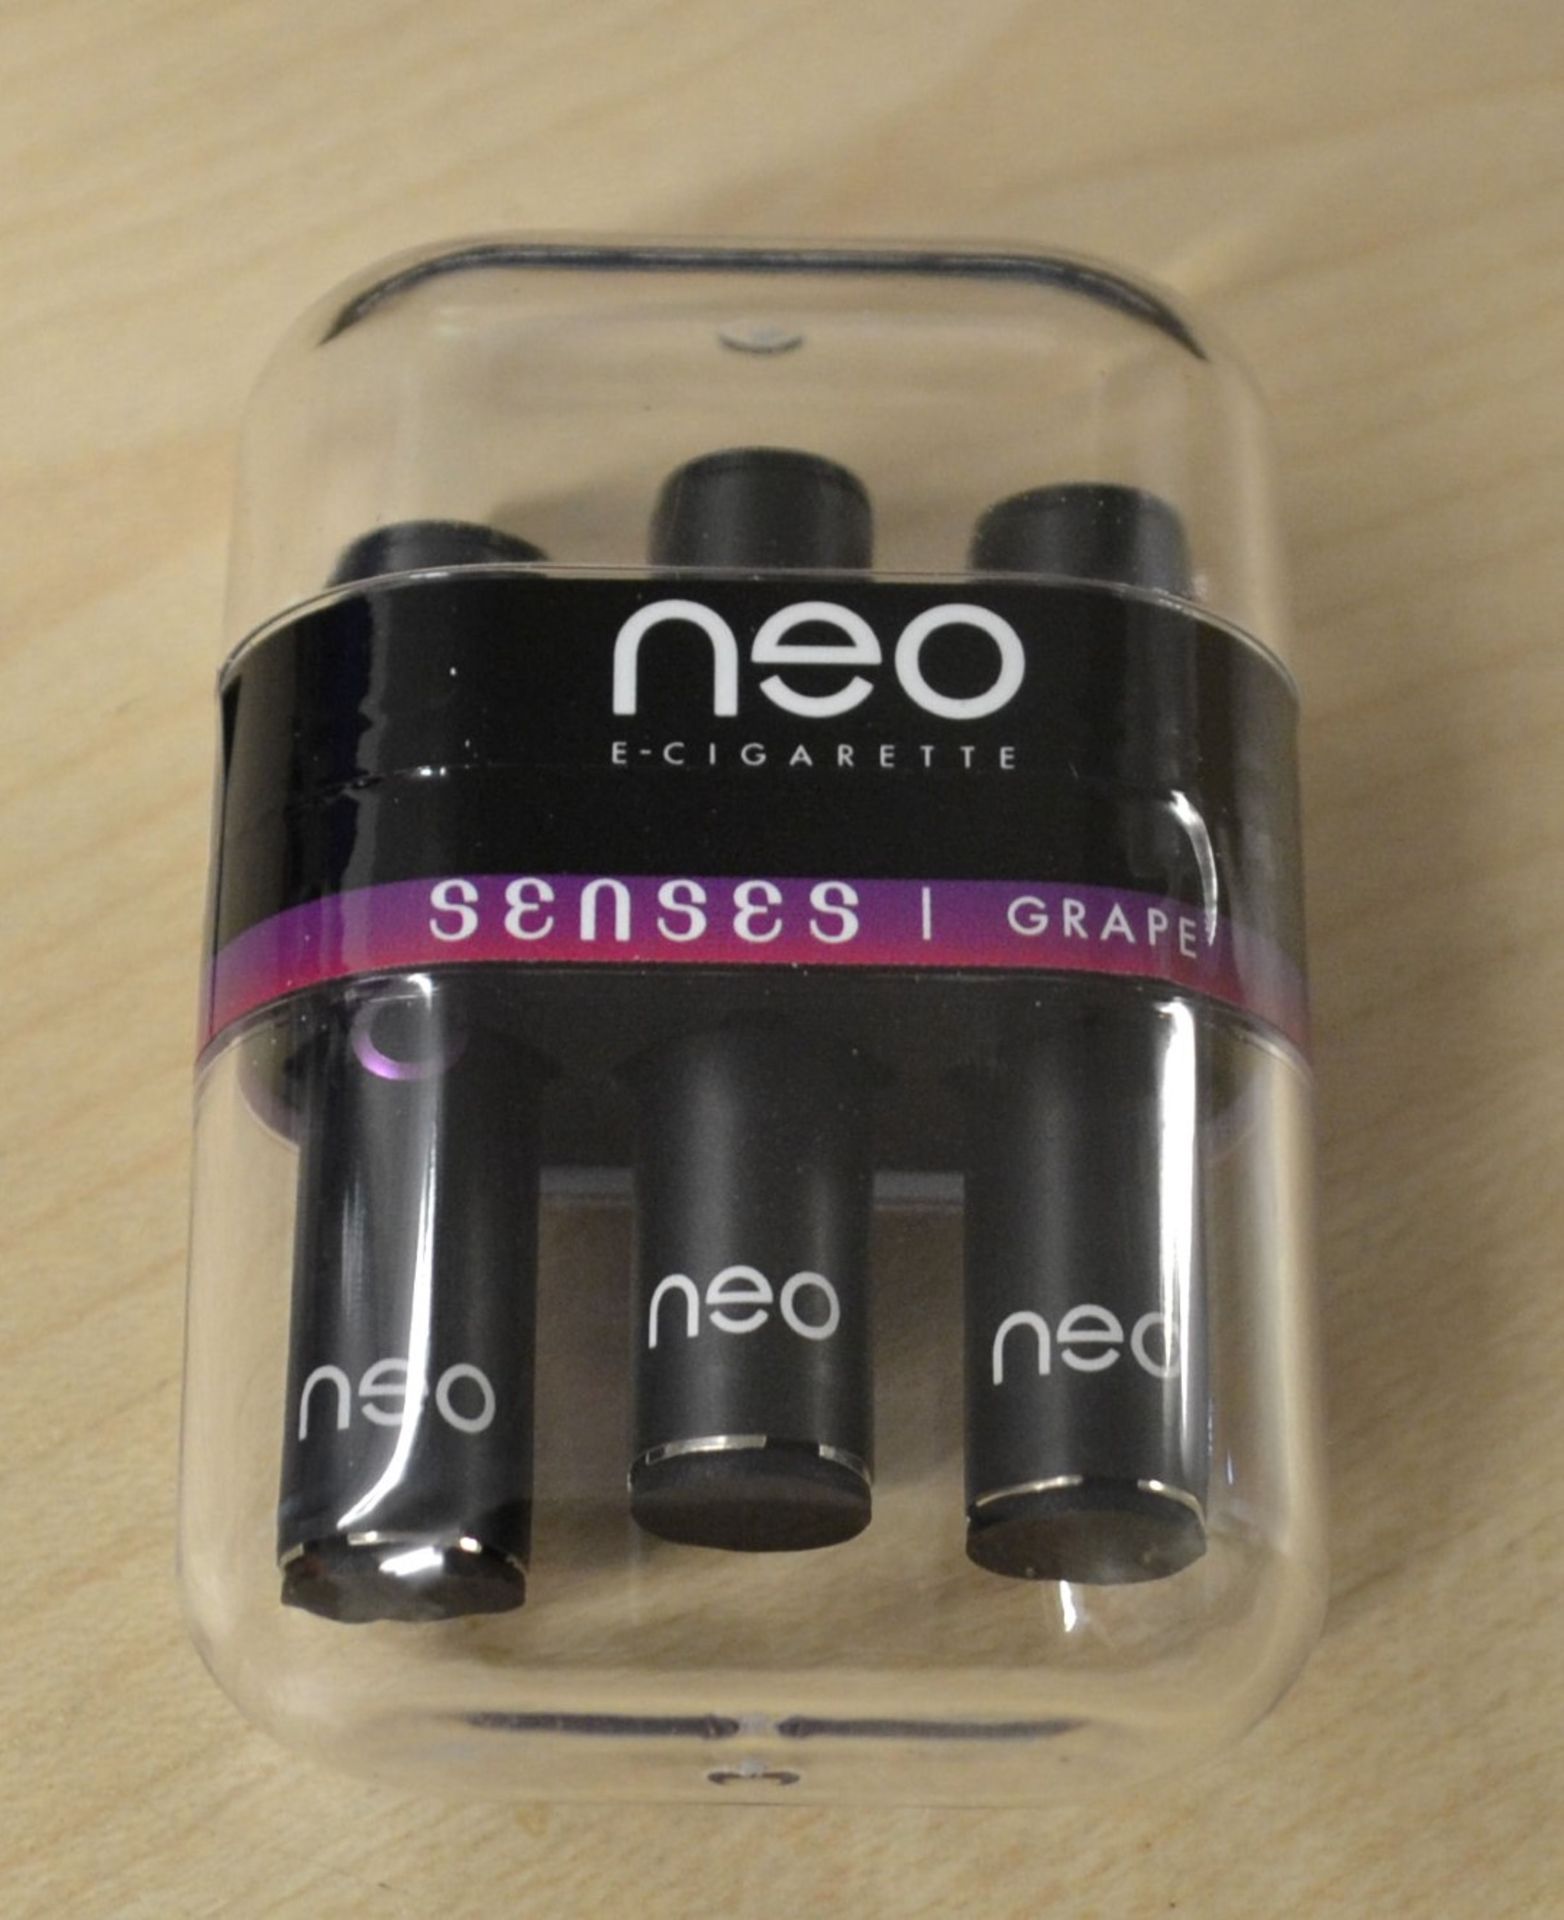 72 x Neo E-Cigarettes Neo Infinity Grape Refill Packs - New & Sealed Stock - CL185 - Ref: DRTGRP - L - Image 5 of 7